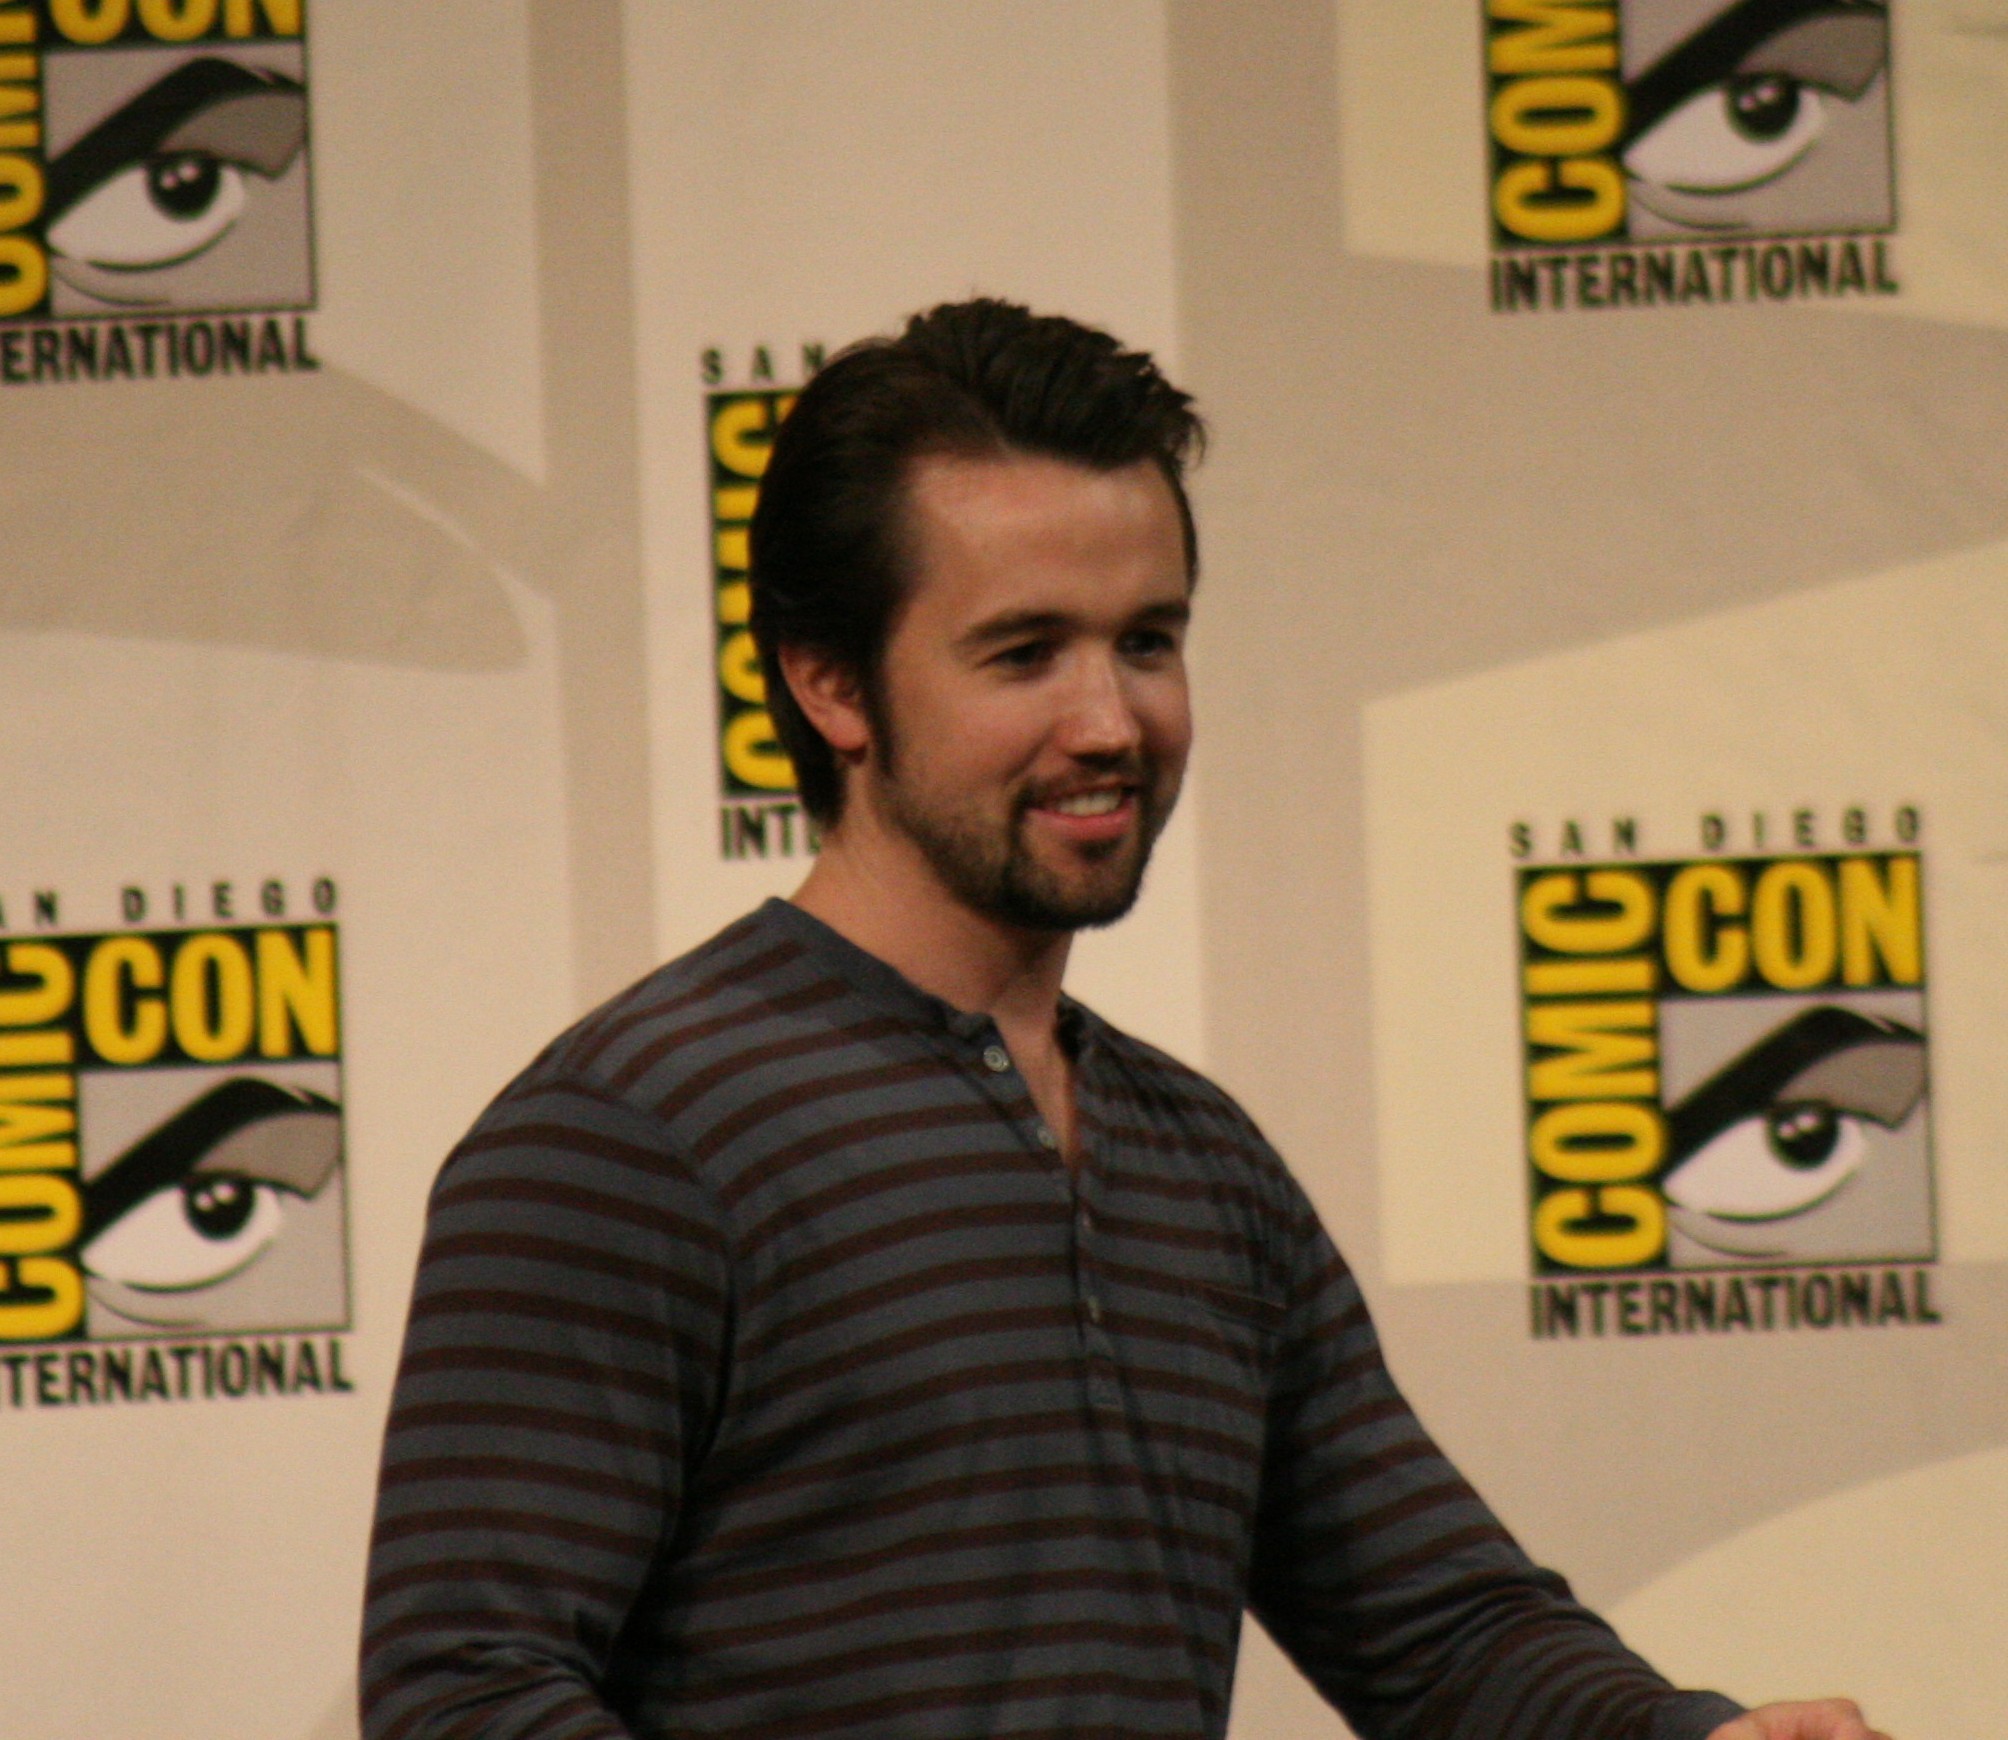 Rob McElhenney at event of It's Always Sunny in Philadelphia (2005)